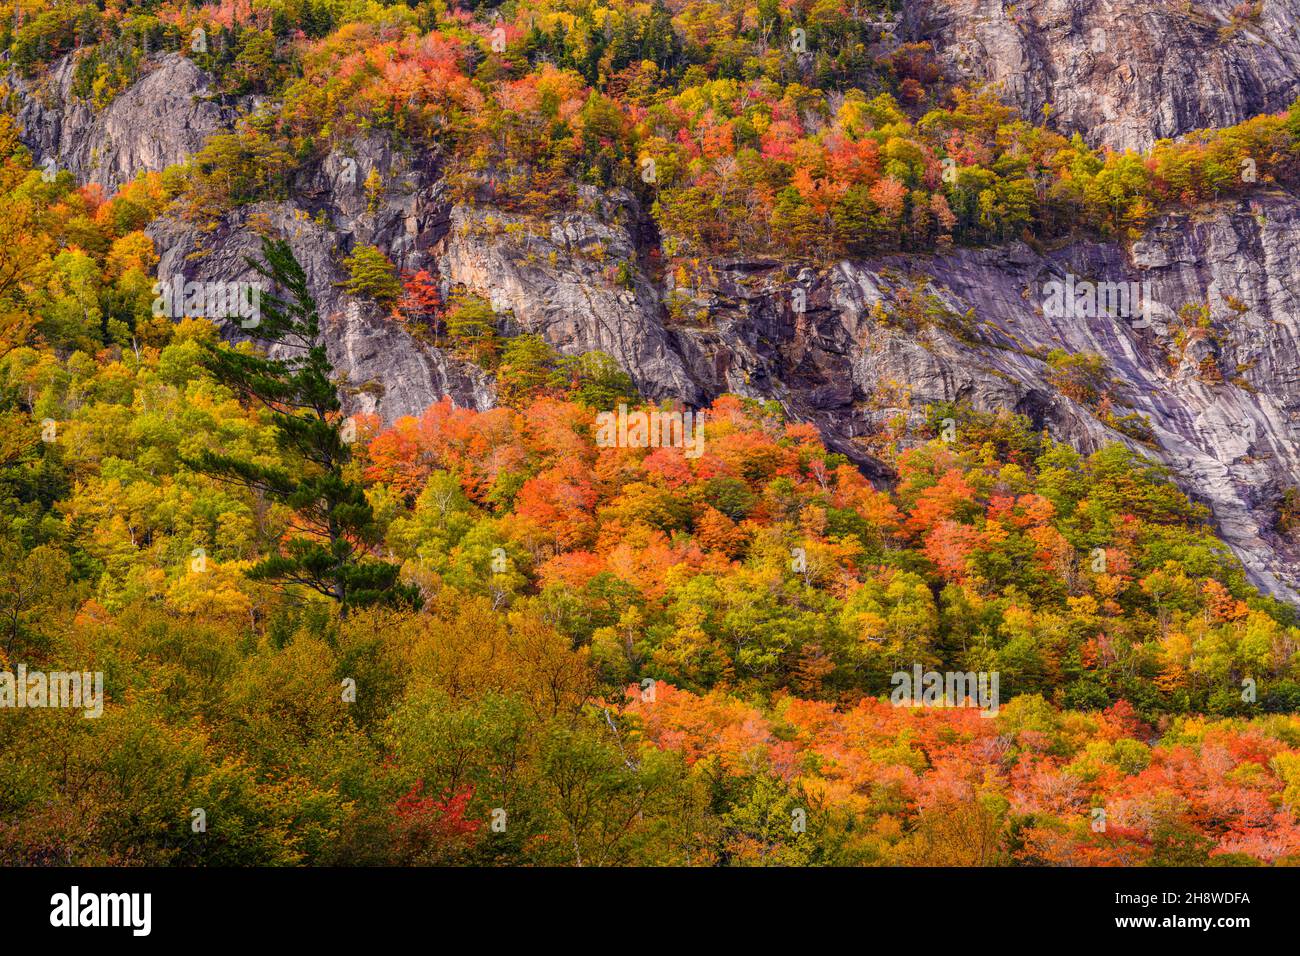 Autumn foliage in the deciduous forest on New England hillsides, Crawford Notch State Park, Hart's Location, New Hampshire, USA Stock Photo